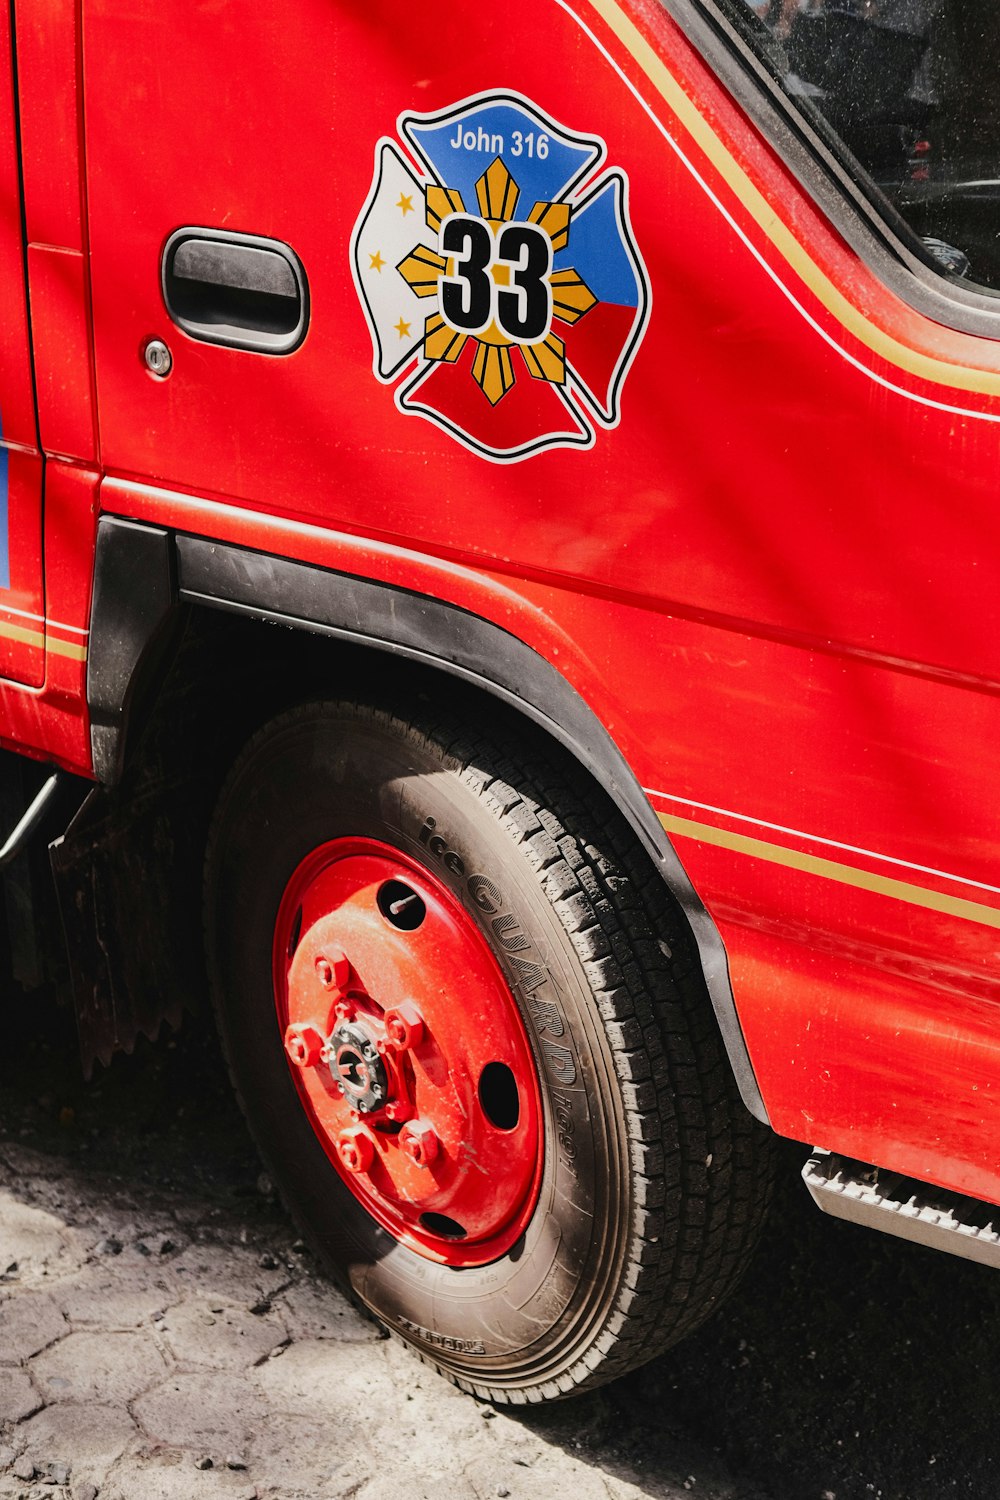 a red fire truck parked on the side of the road